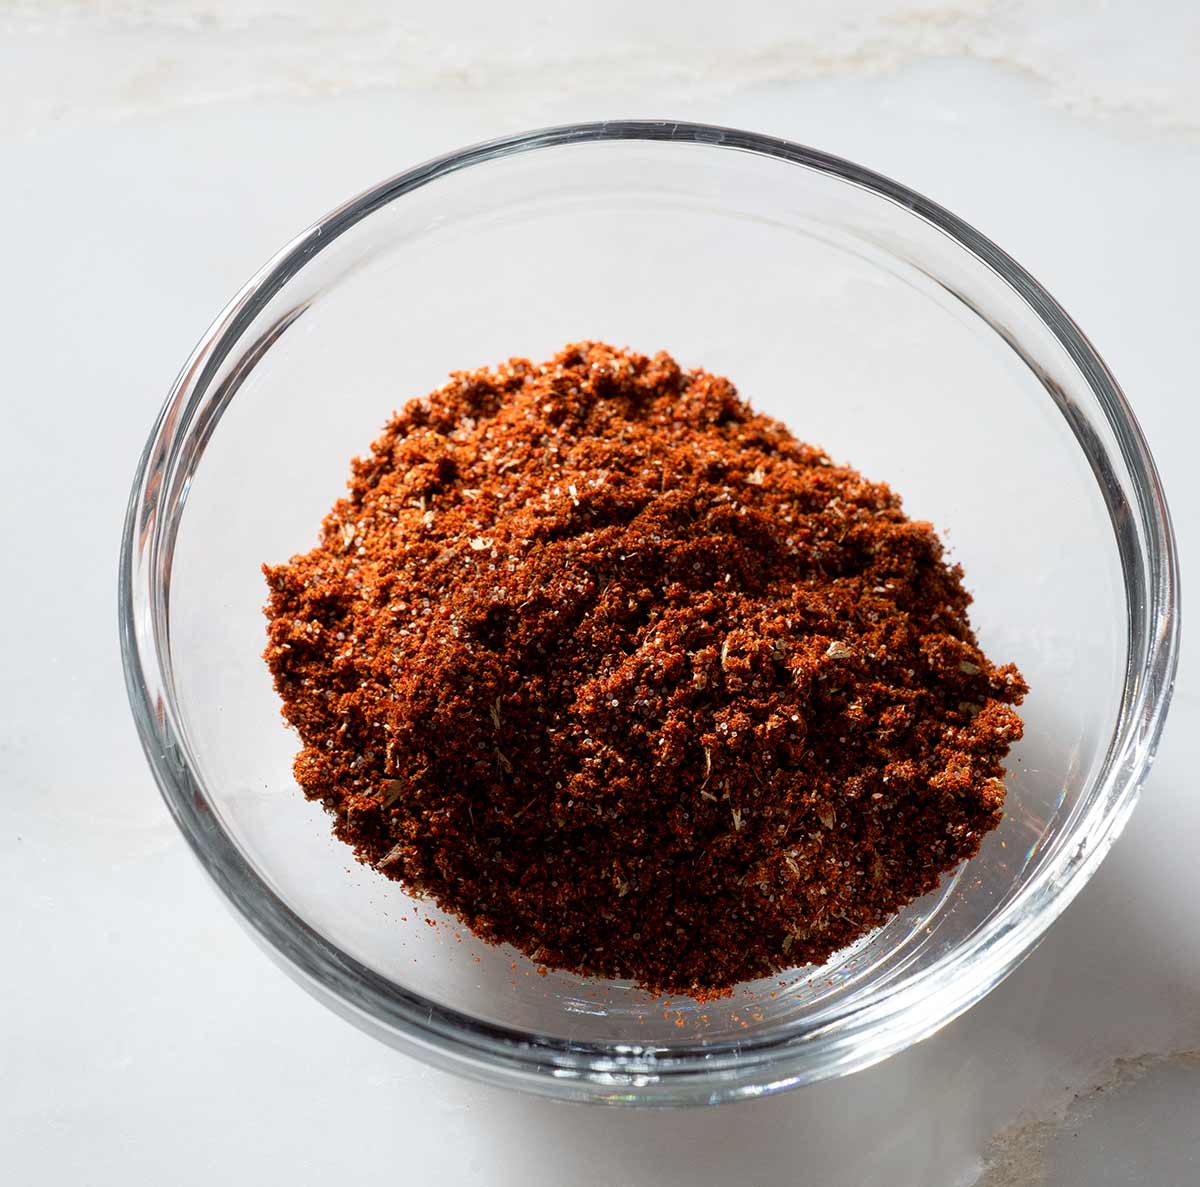 Homemade chili powder in a glass bowl.